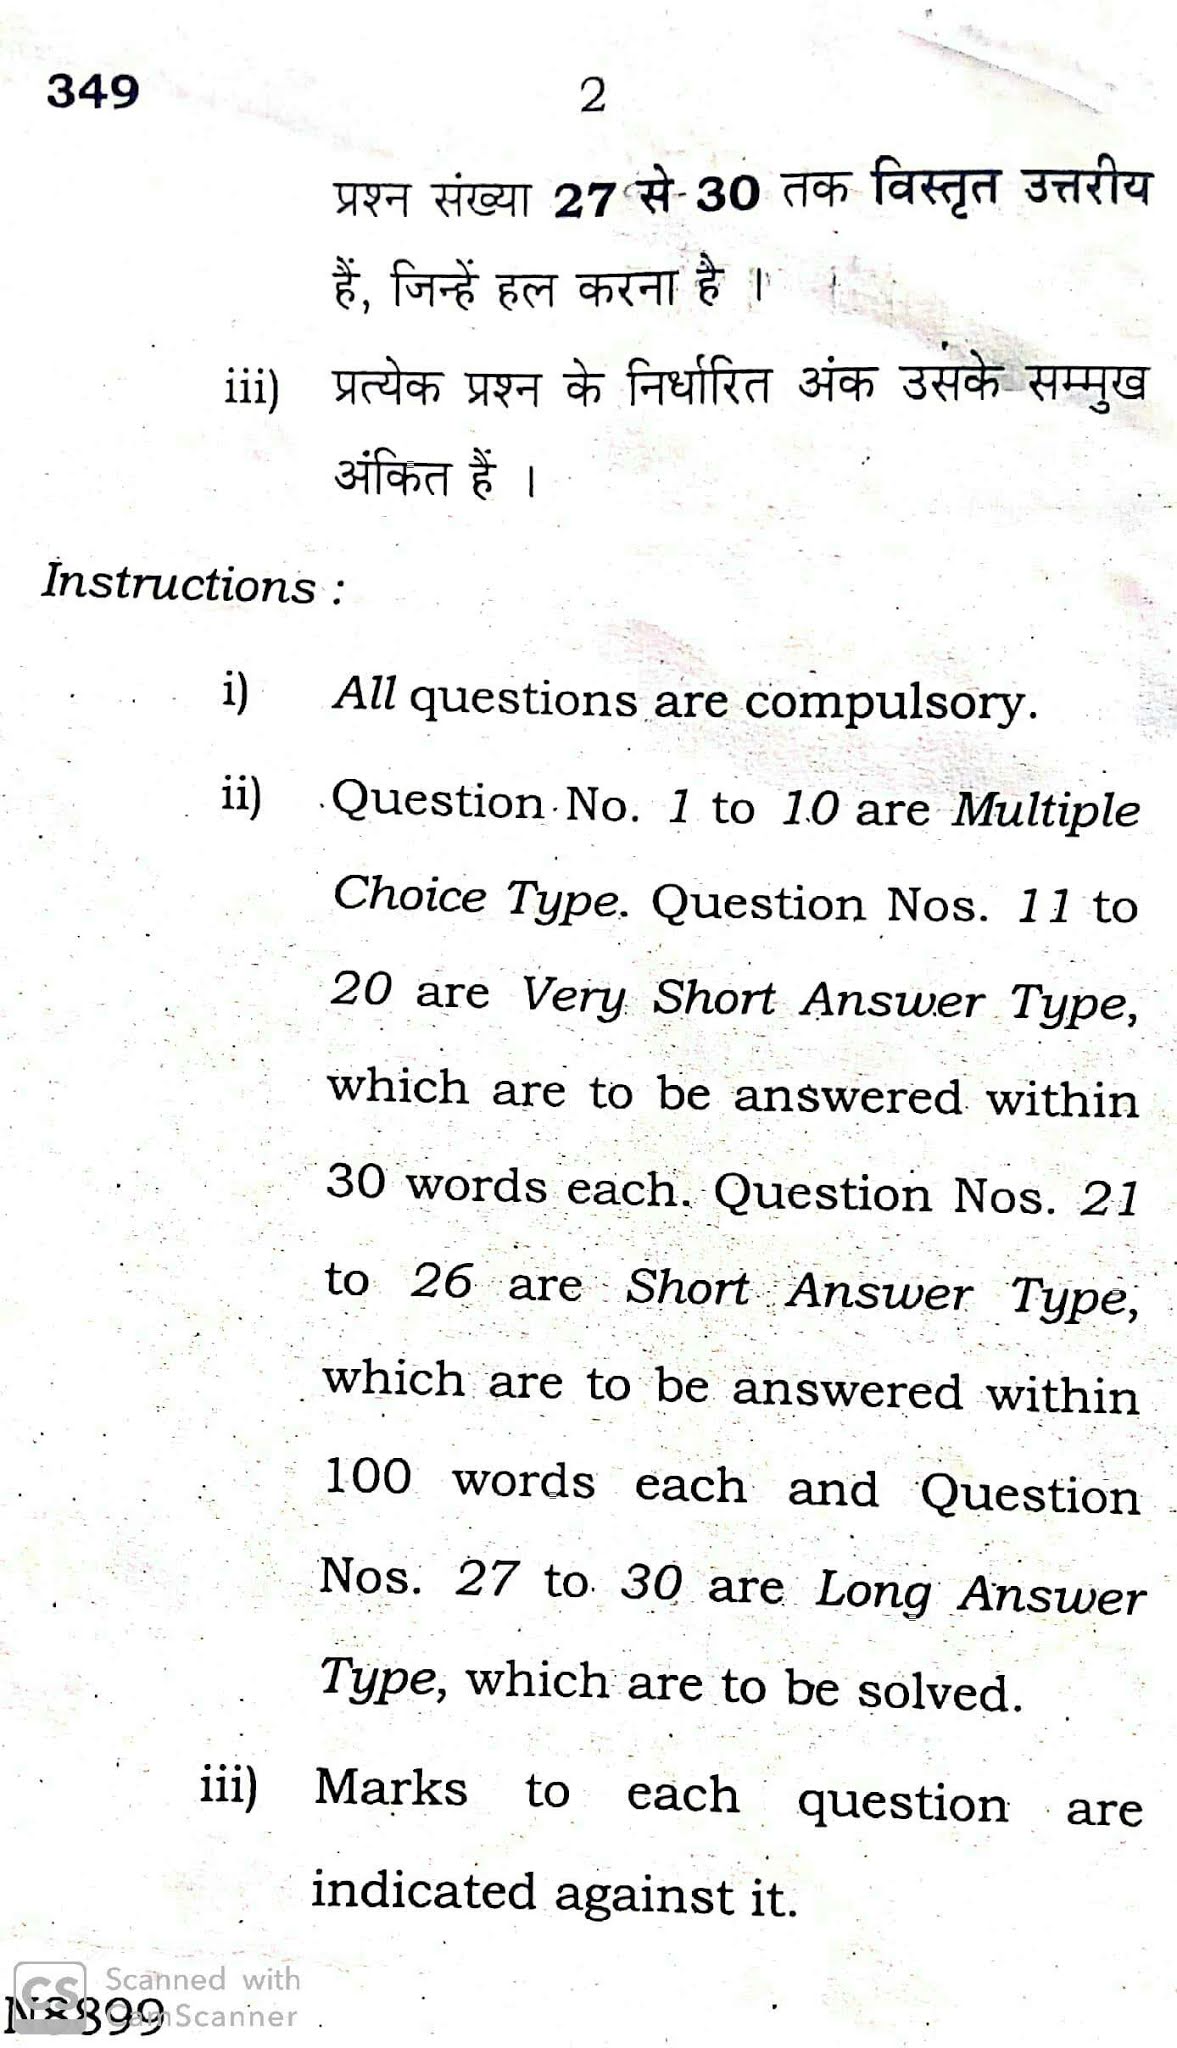 Book keeping & Accountancy, UP Board Question Paper for 12th (Intermediate), 2020 Examination